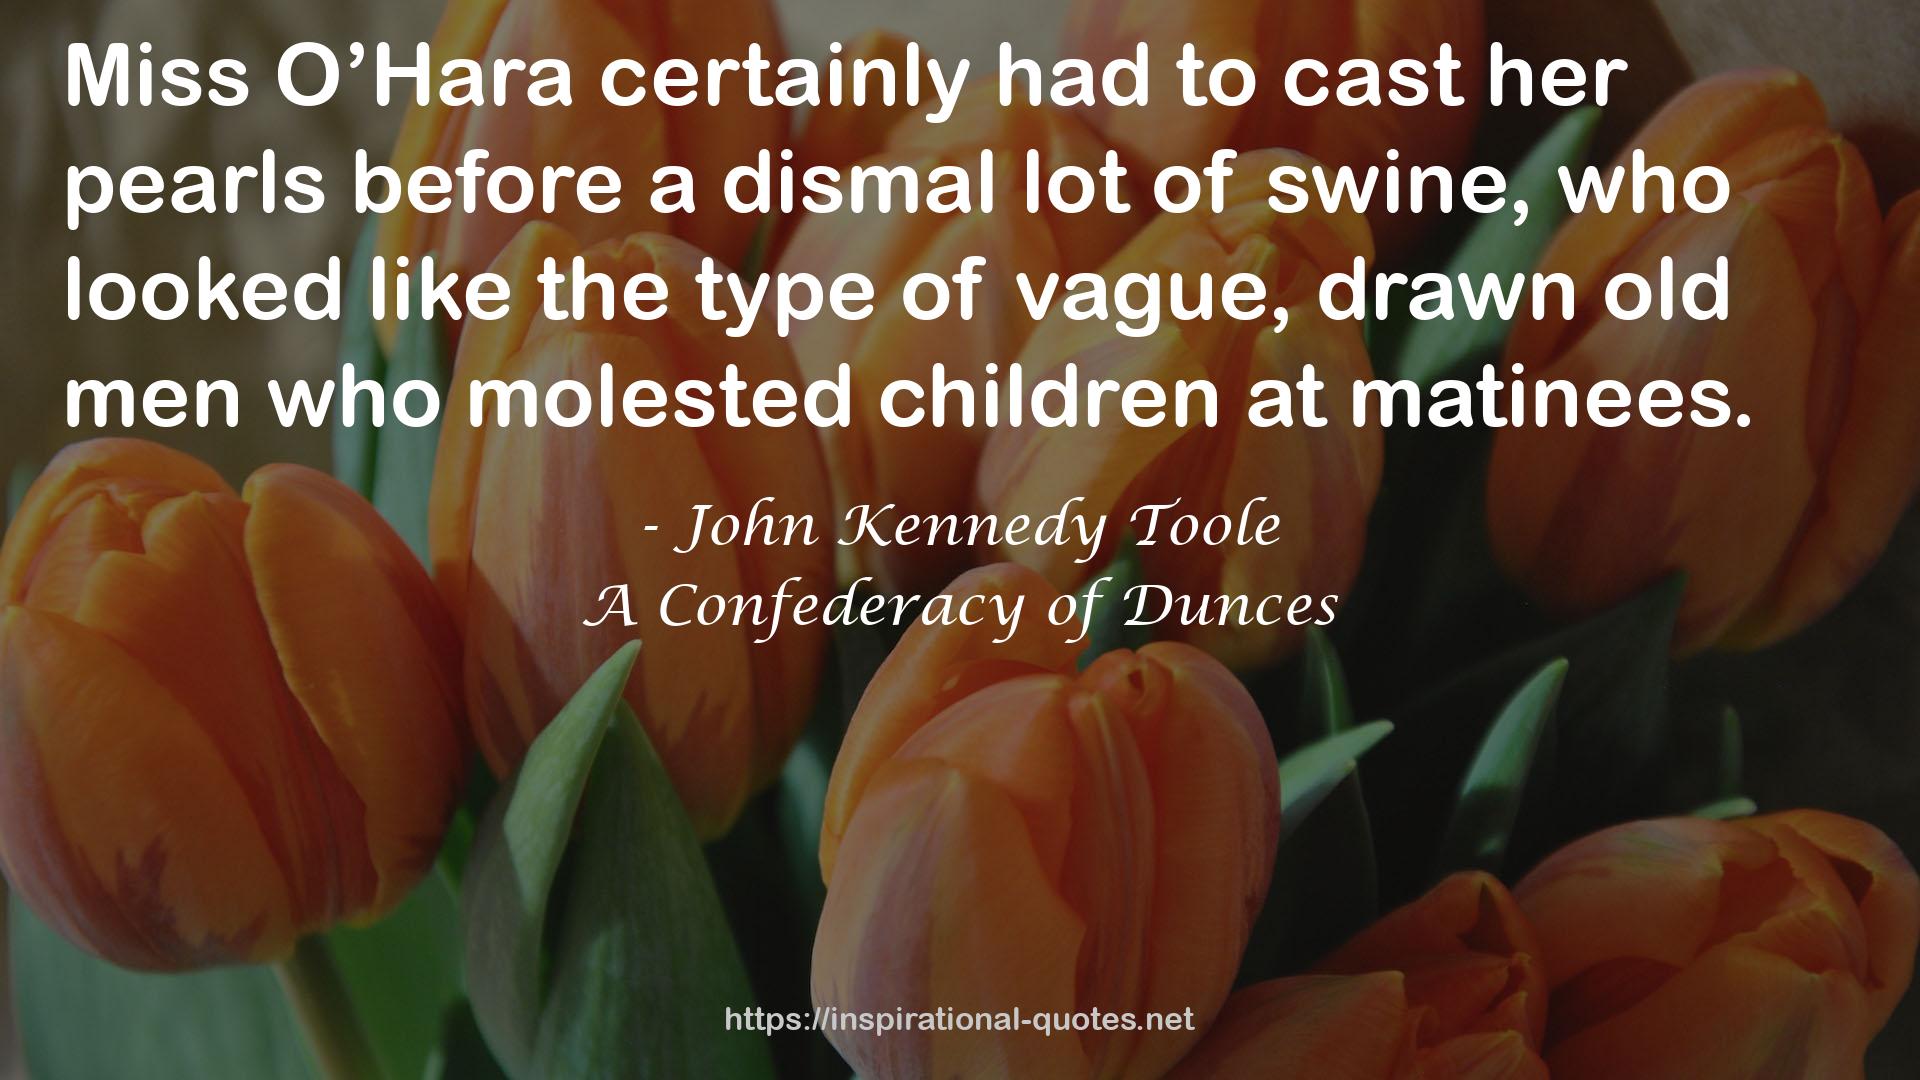 John Kennedy Toole QUOTES